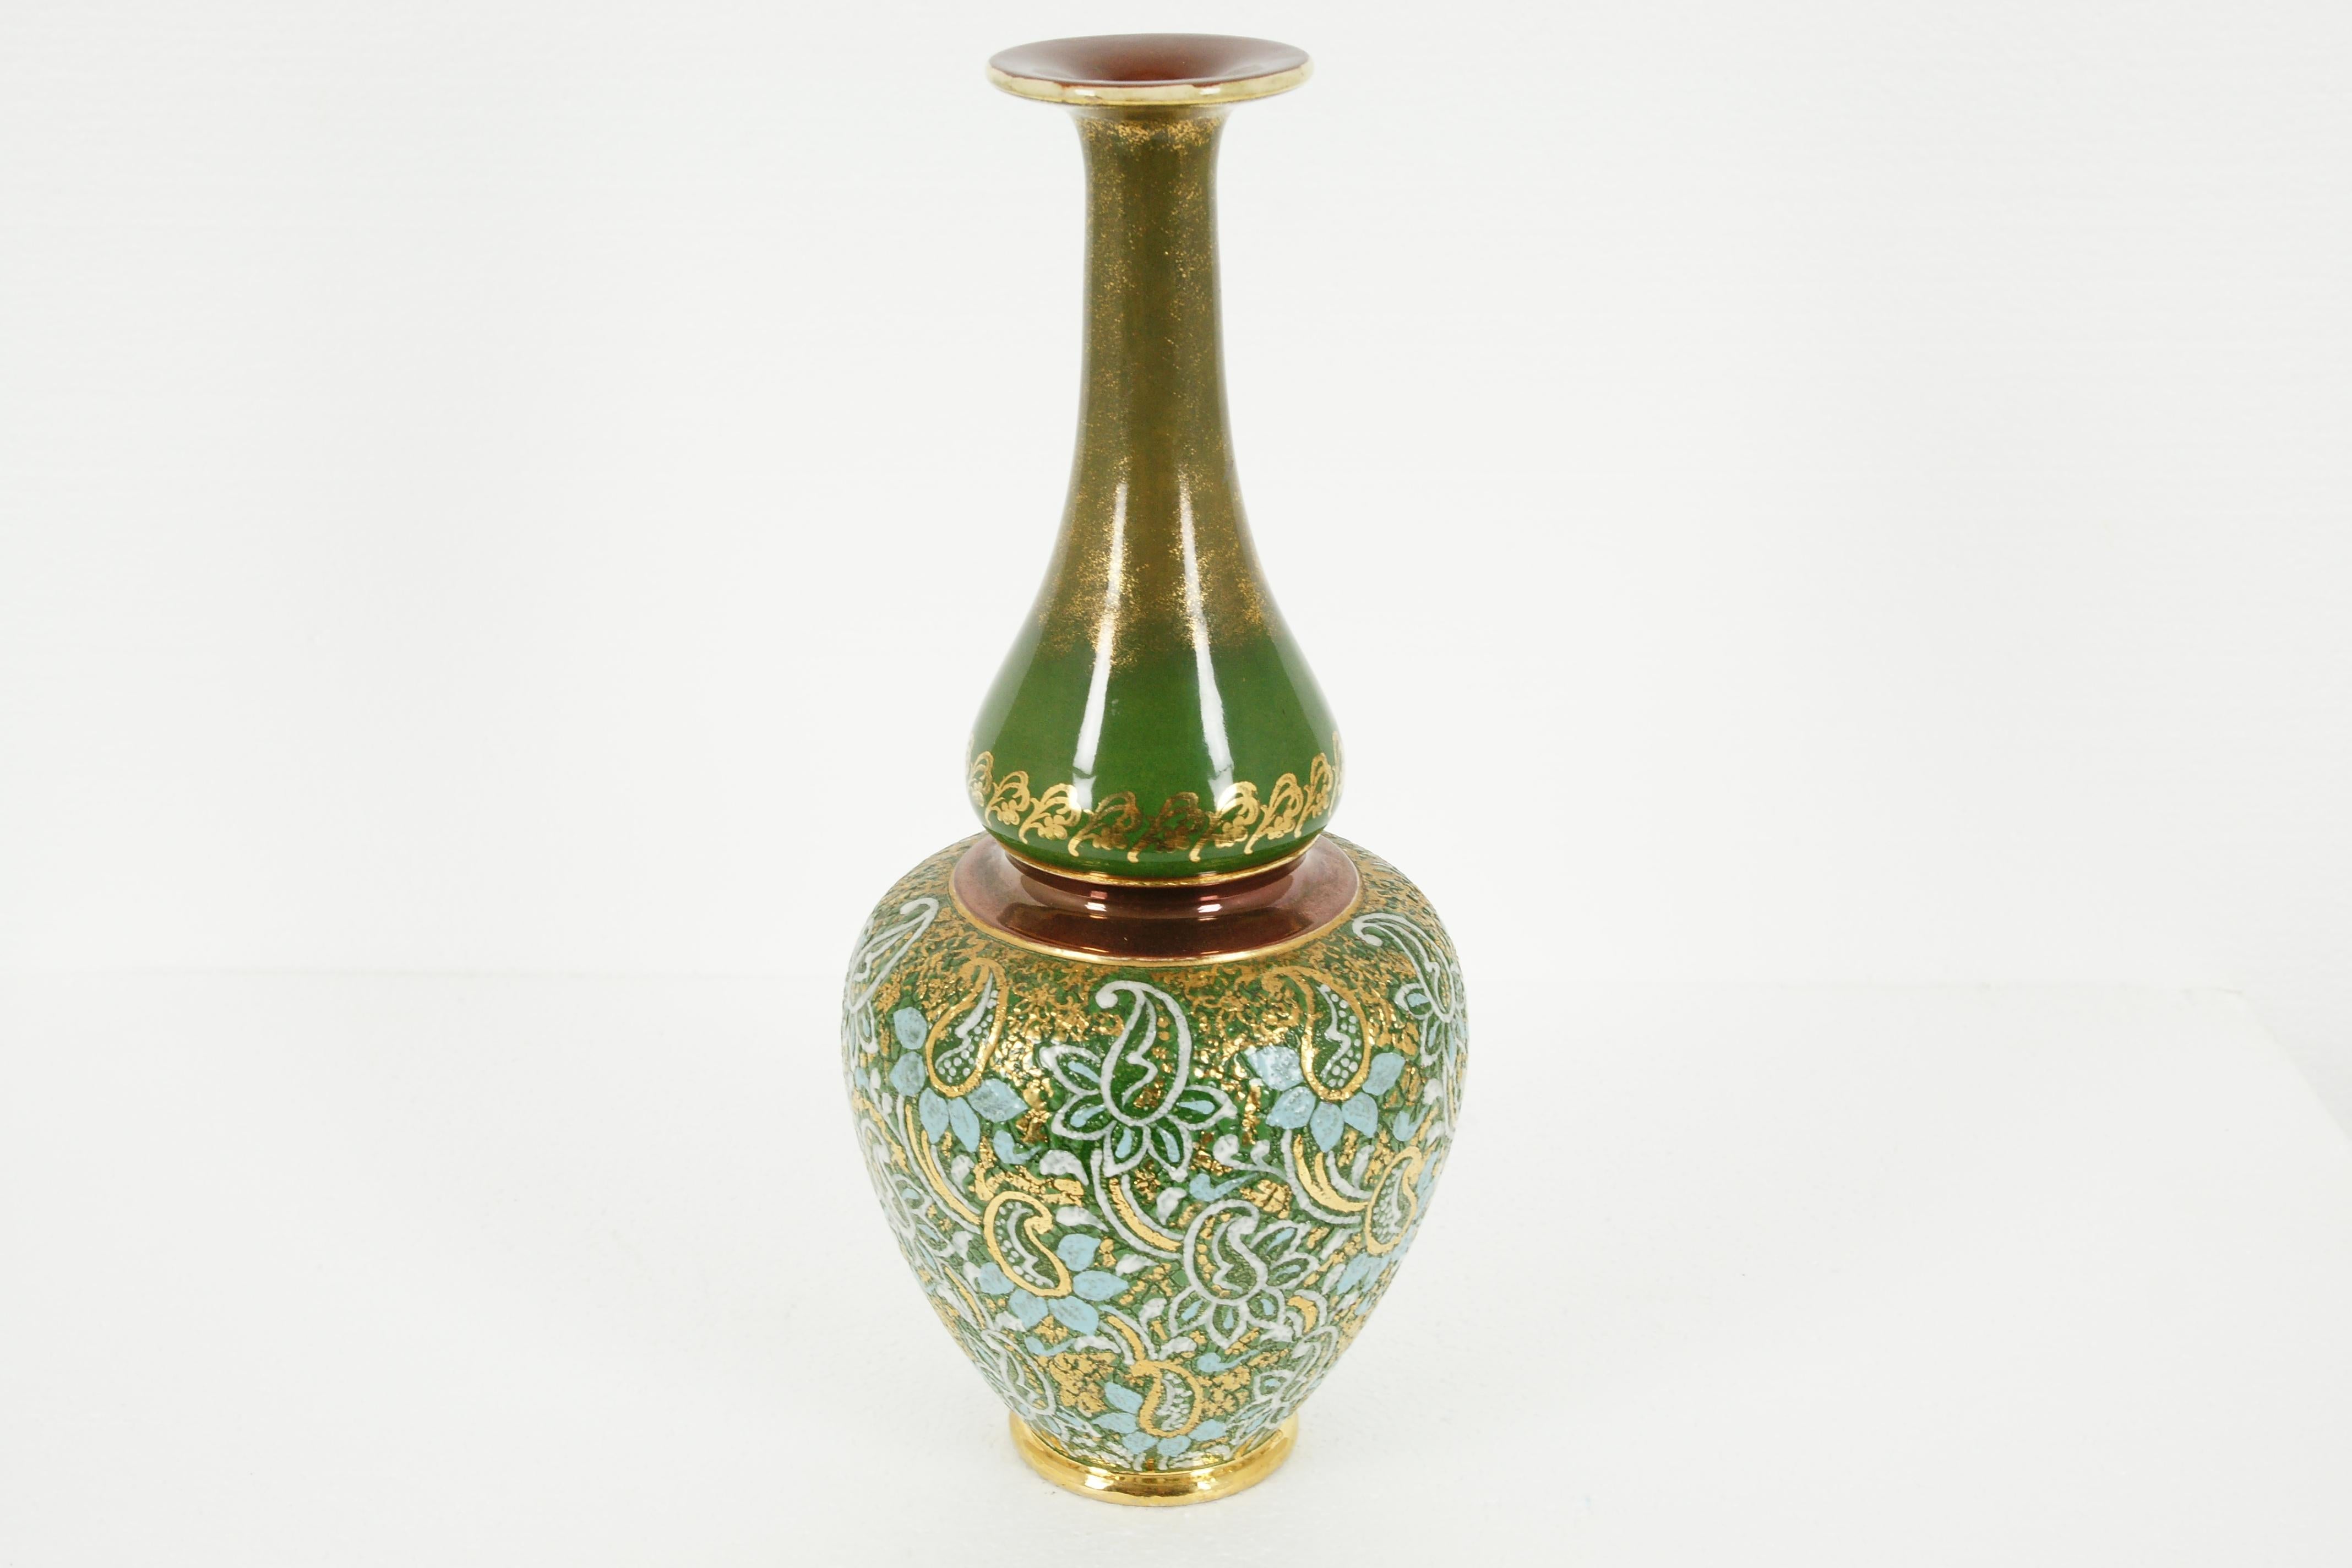 Royal Doulton glazed stoneware slater mantle vase, England, B1992

England
Glazed stoneware vase, Persian bottle shape
Overlaid with hand painted flowers
With gilt trim, green neck
Stamped underside: Doulton Slater Lambeth 24 F5608 
No chips,